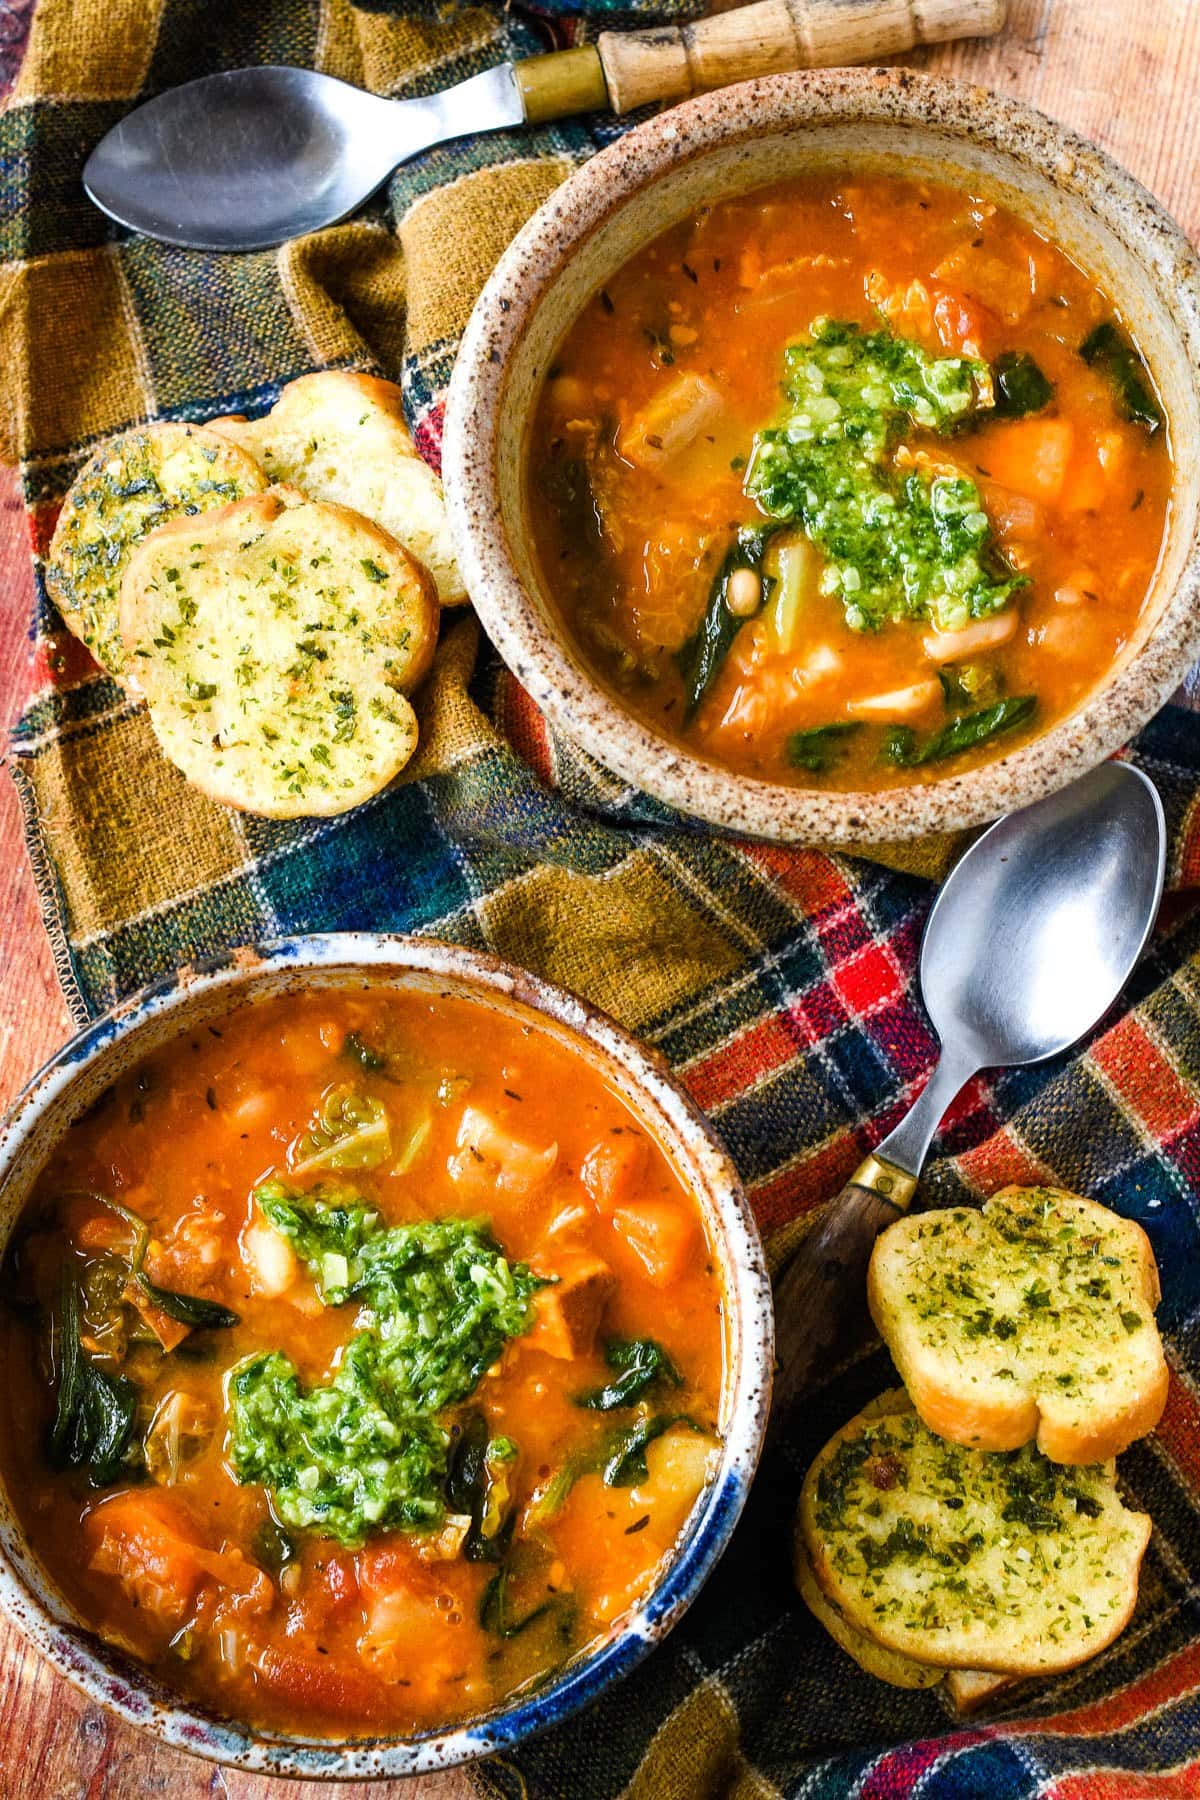 Vegetable soup with vegetables, parsnips, cabbage, spinach, and pesto, served with garlic bread and a spoon on a rustic table cloth